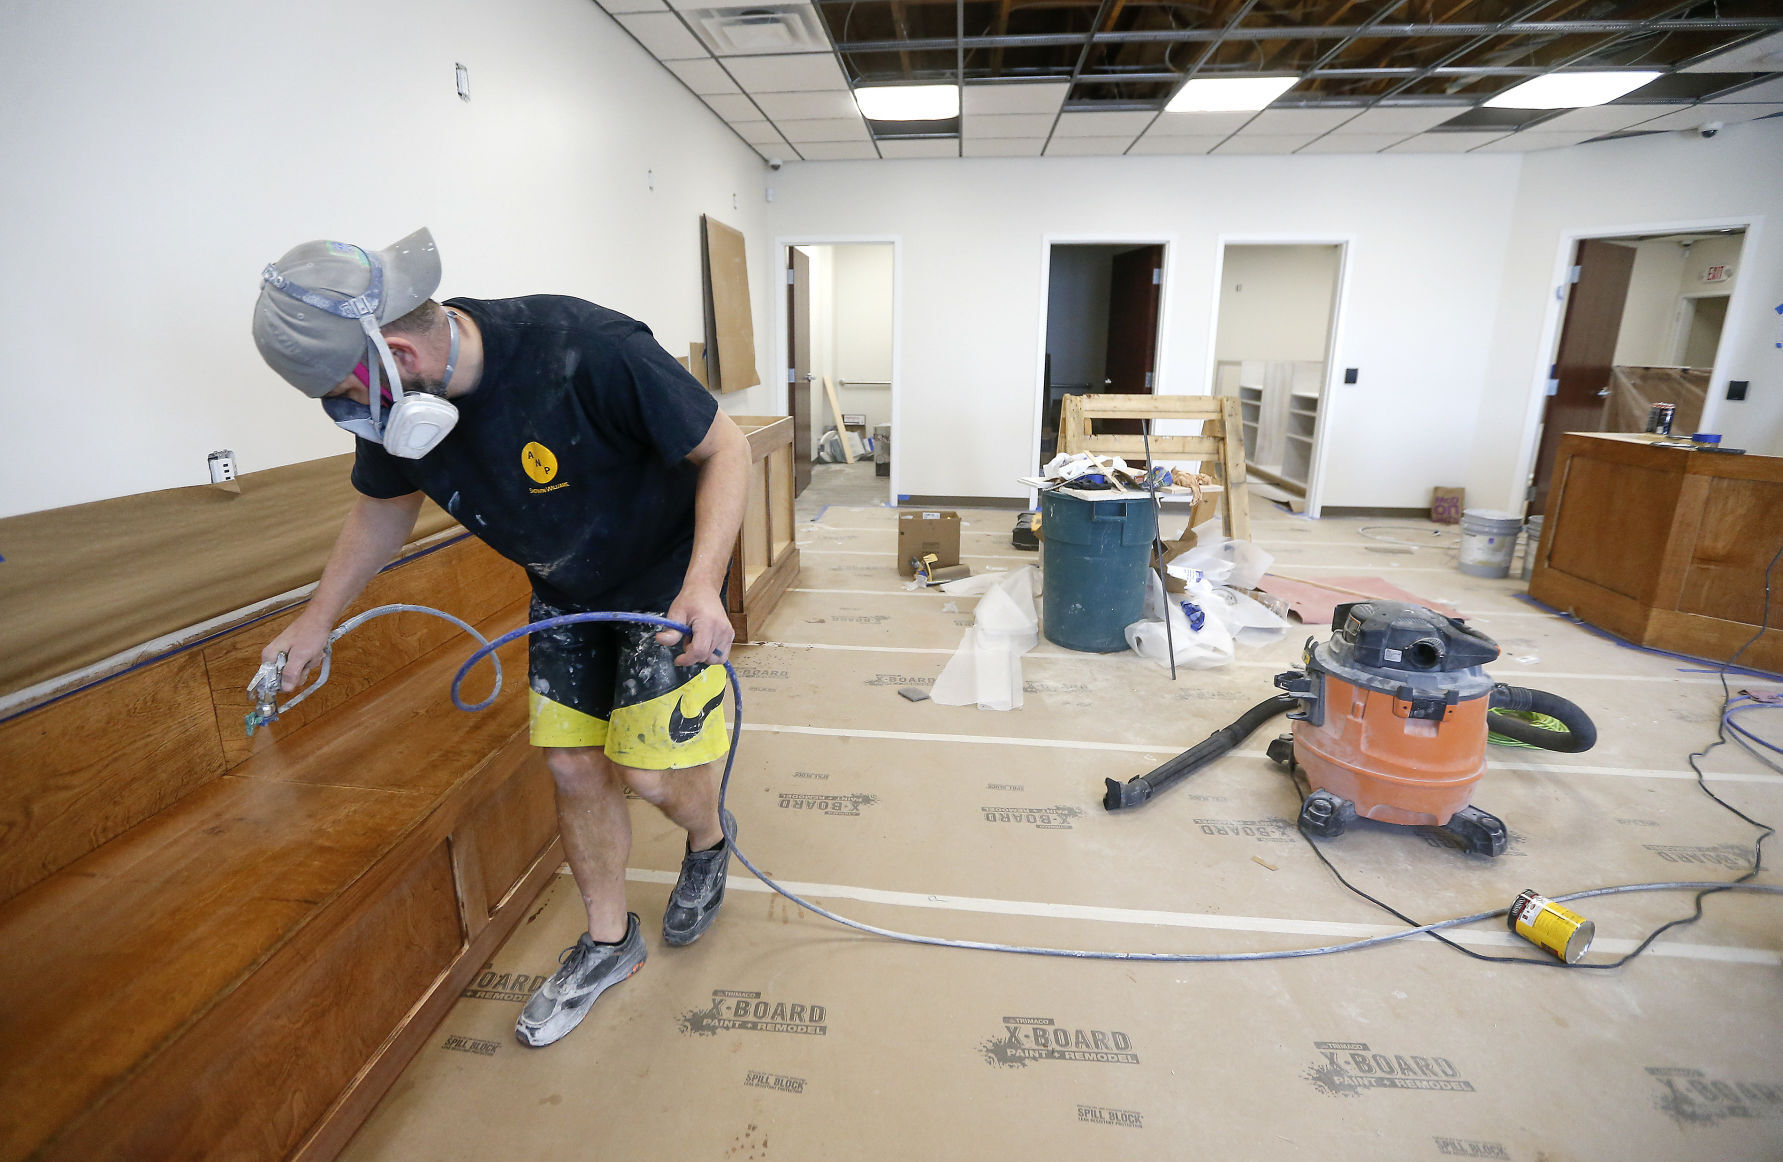 Greg Lehman, of Lehman Painting, sprays lacquer onto wooden seating in the lobby of the future home of an adult-use cannabis dispensary on Illinois 35 in East Dubuque, Ill. PHOTO CREDIT: Dave Kettering